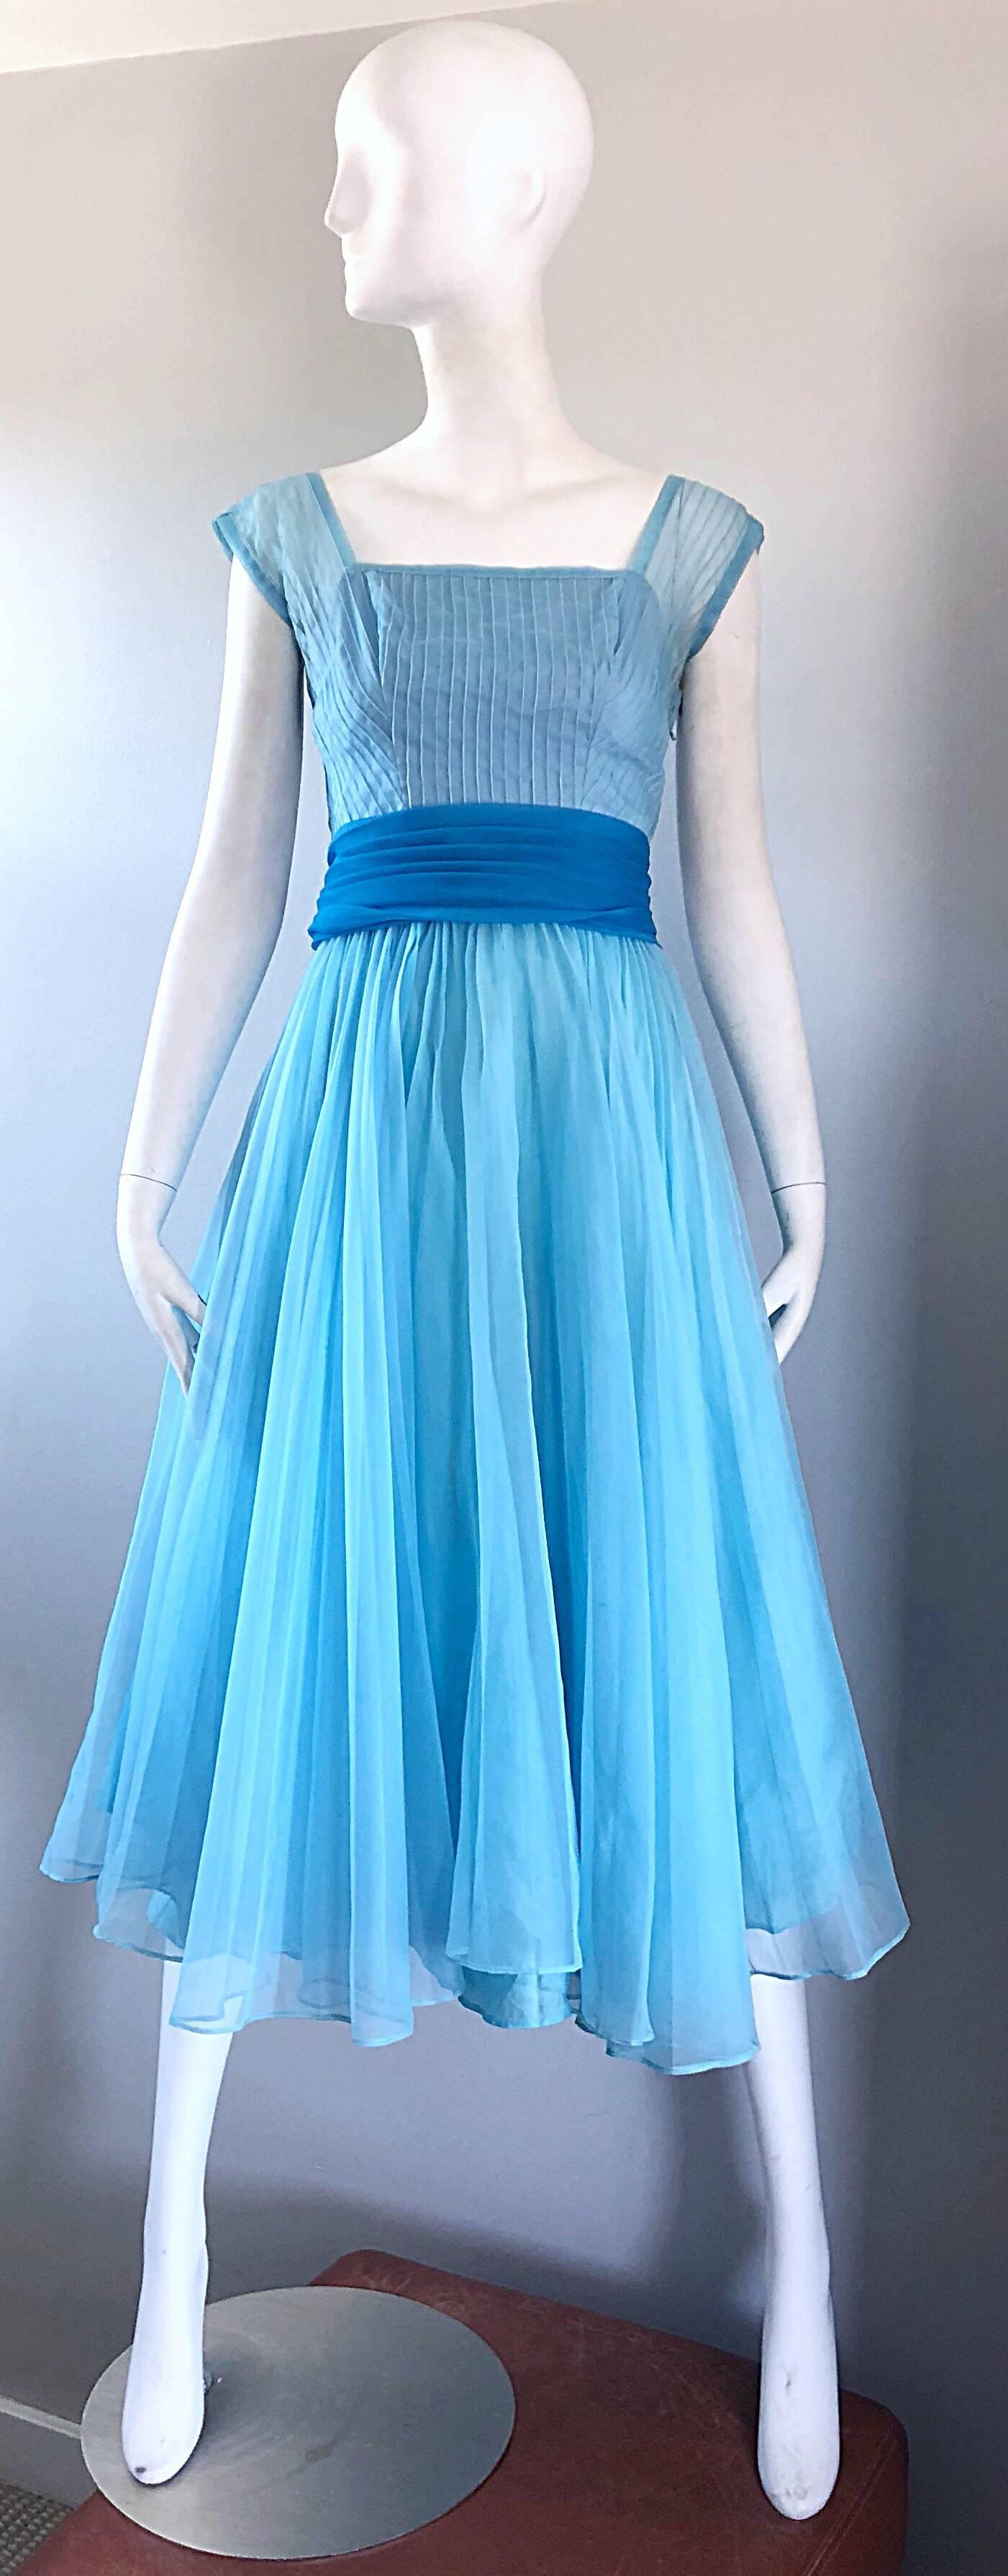 Beautiful 1950s FRED PERLBERG robin eggs blue fit n' flare dress! Features a ribbed fitted bodice with cap sleeves. Full forgiving skirt with attached sash belt. Full metal zipper up the side with hook-and-eye and snap closures. Very well made, with